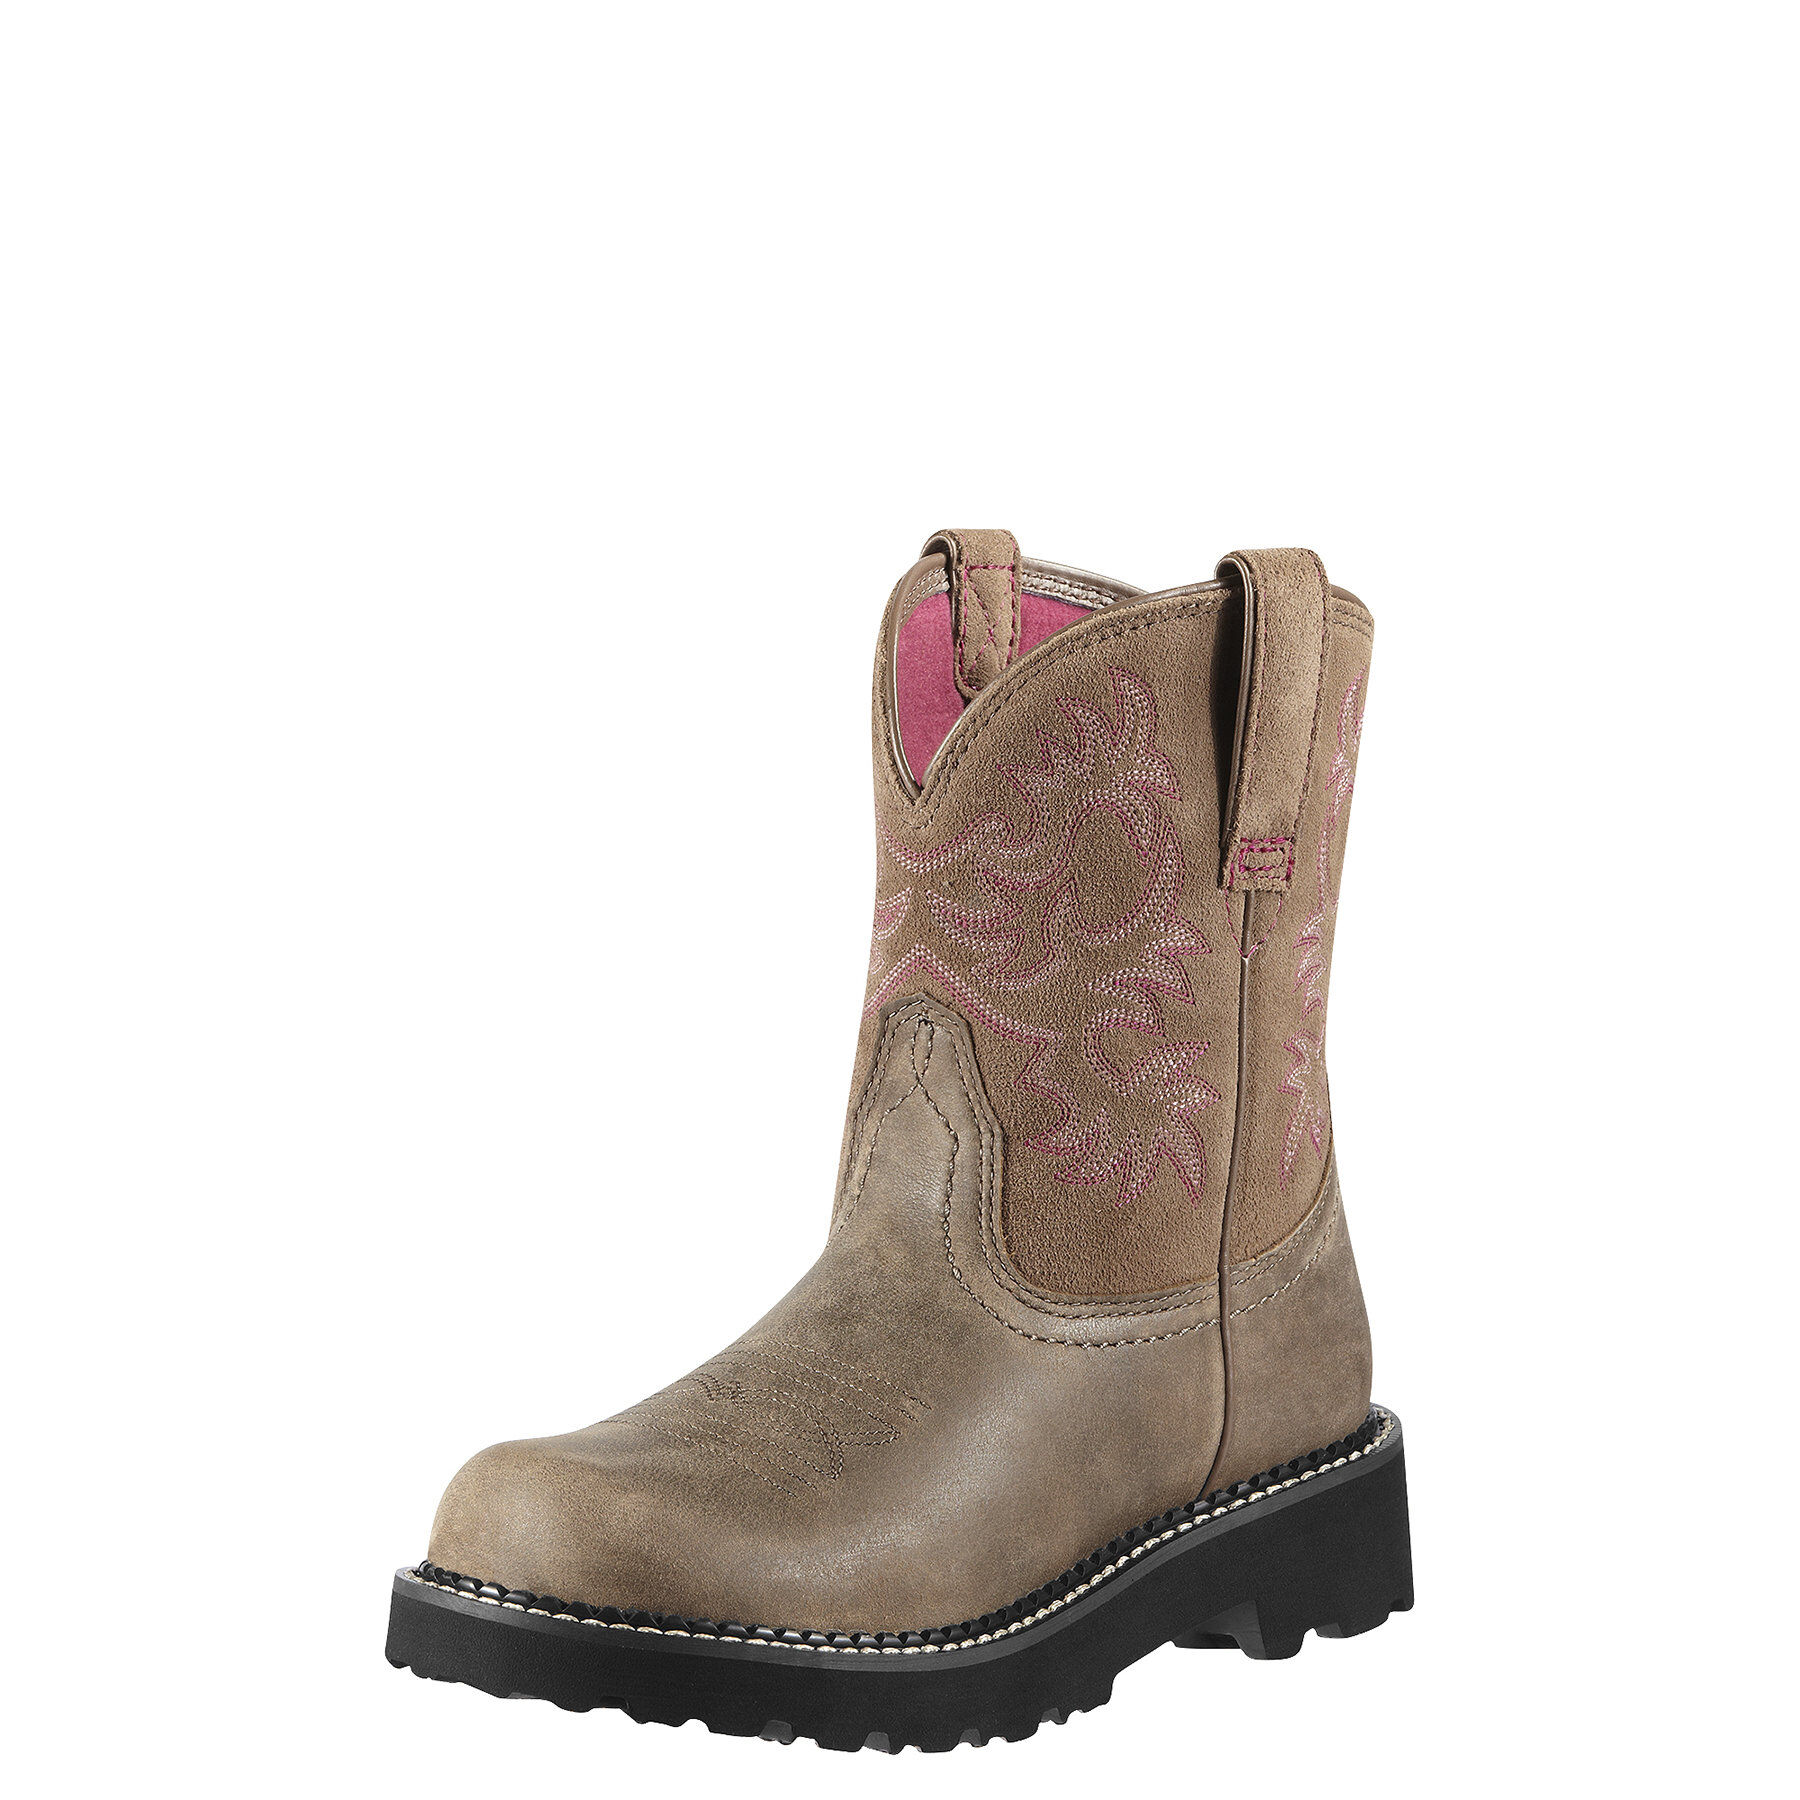 women's ariat fatbaby boots sale